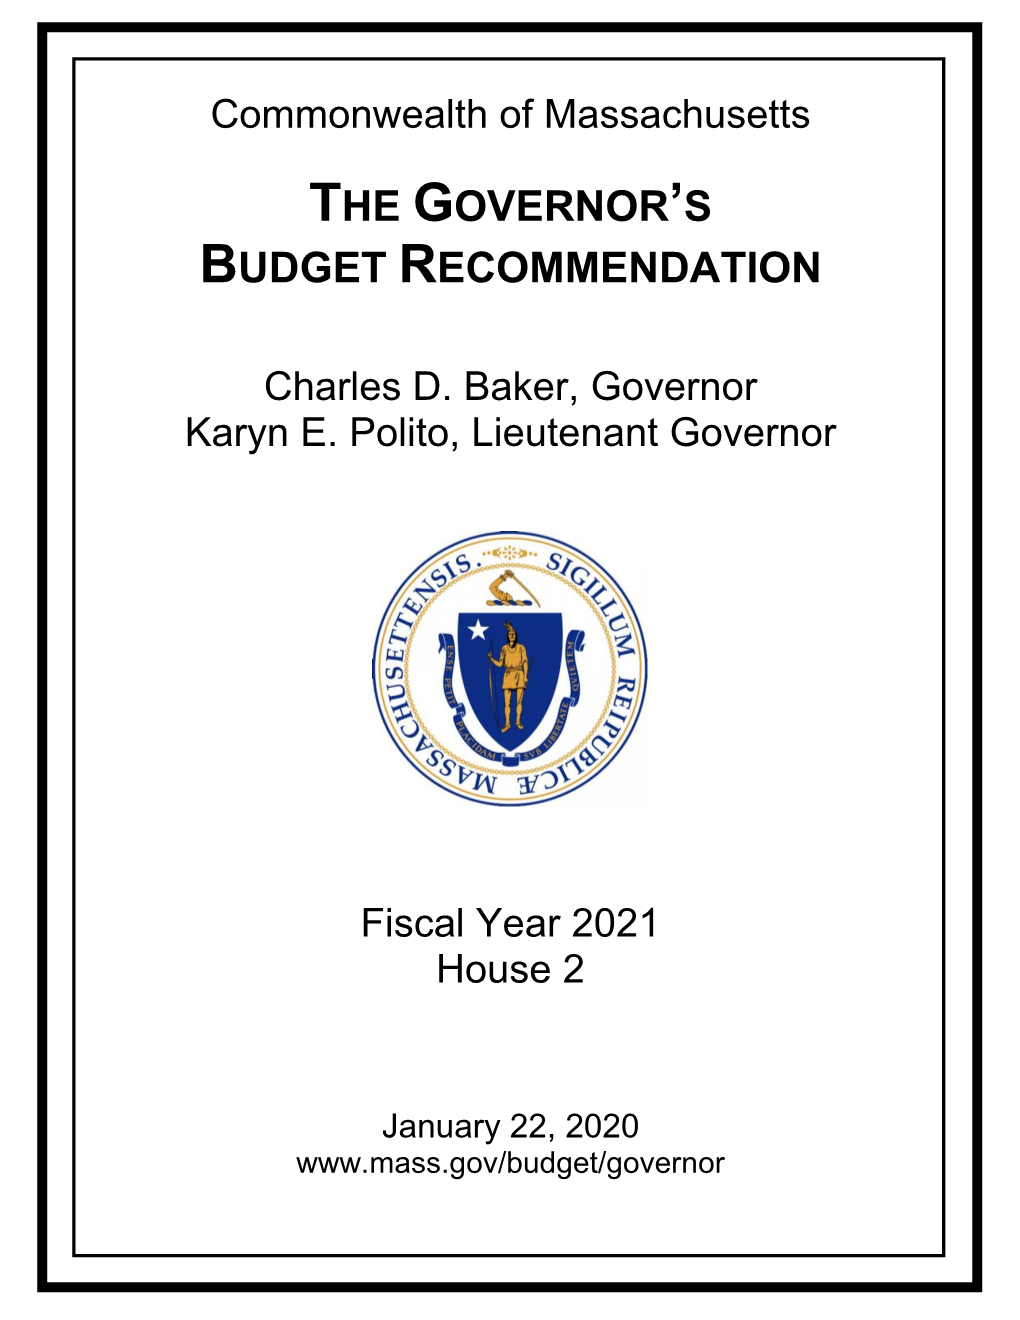 The Governor's Budget Recommendation Is Also Available On-Line At